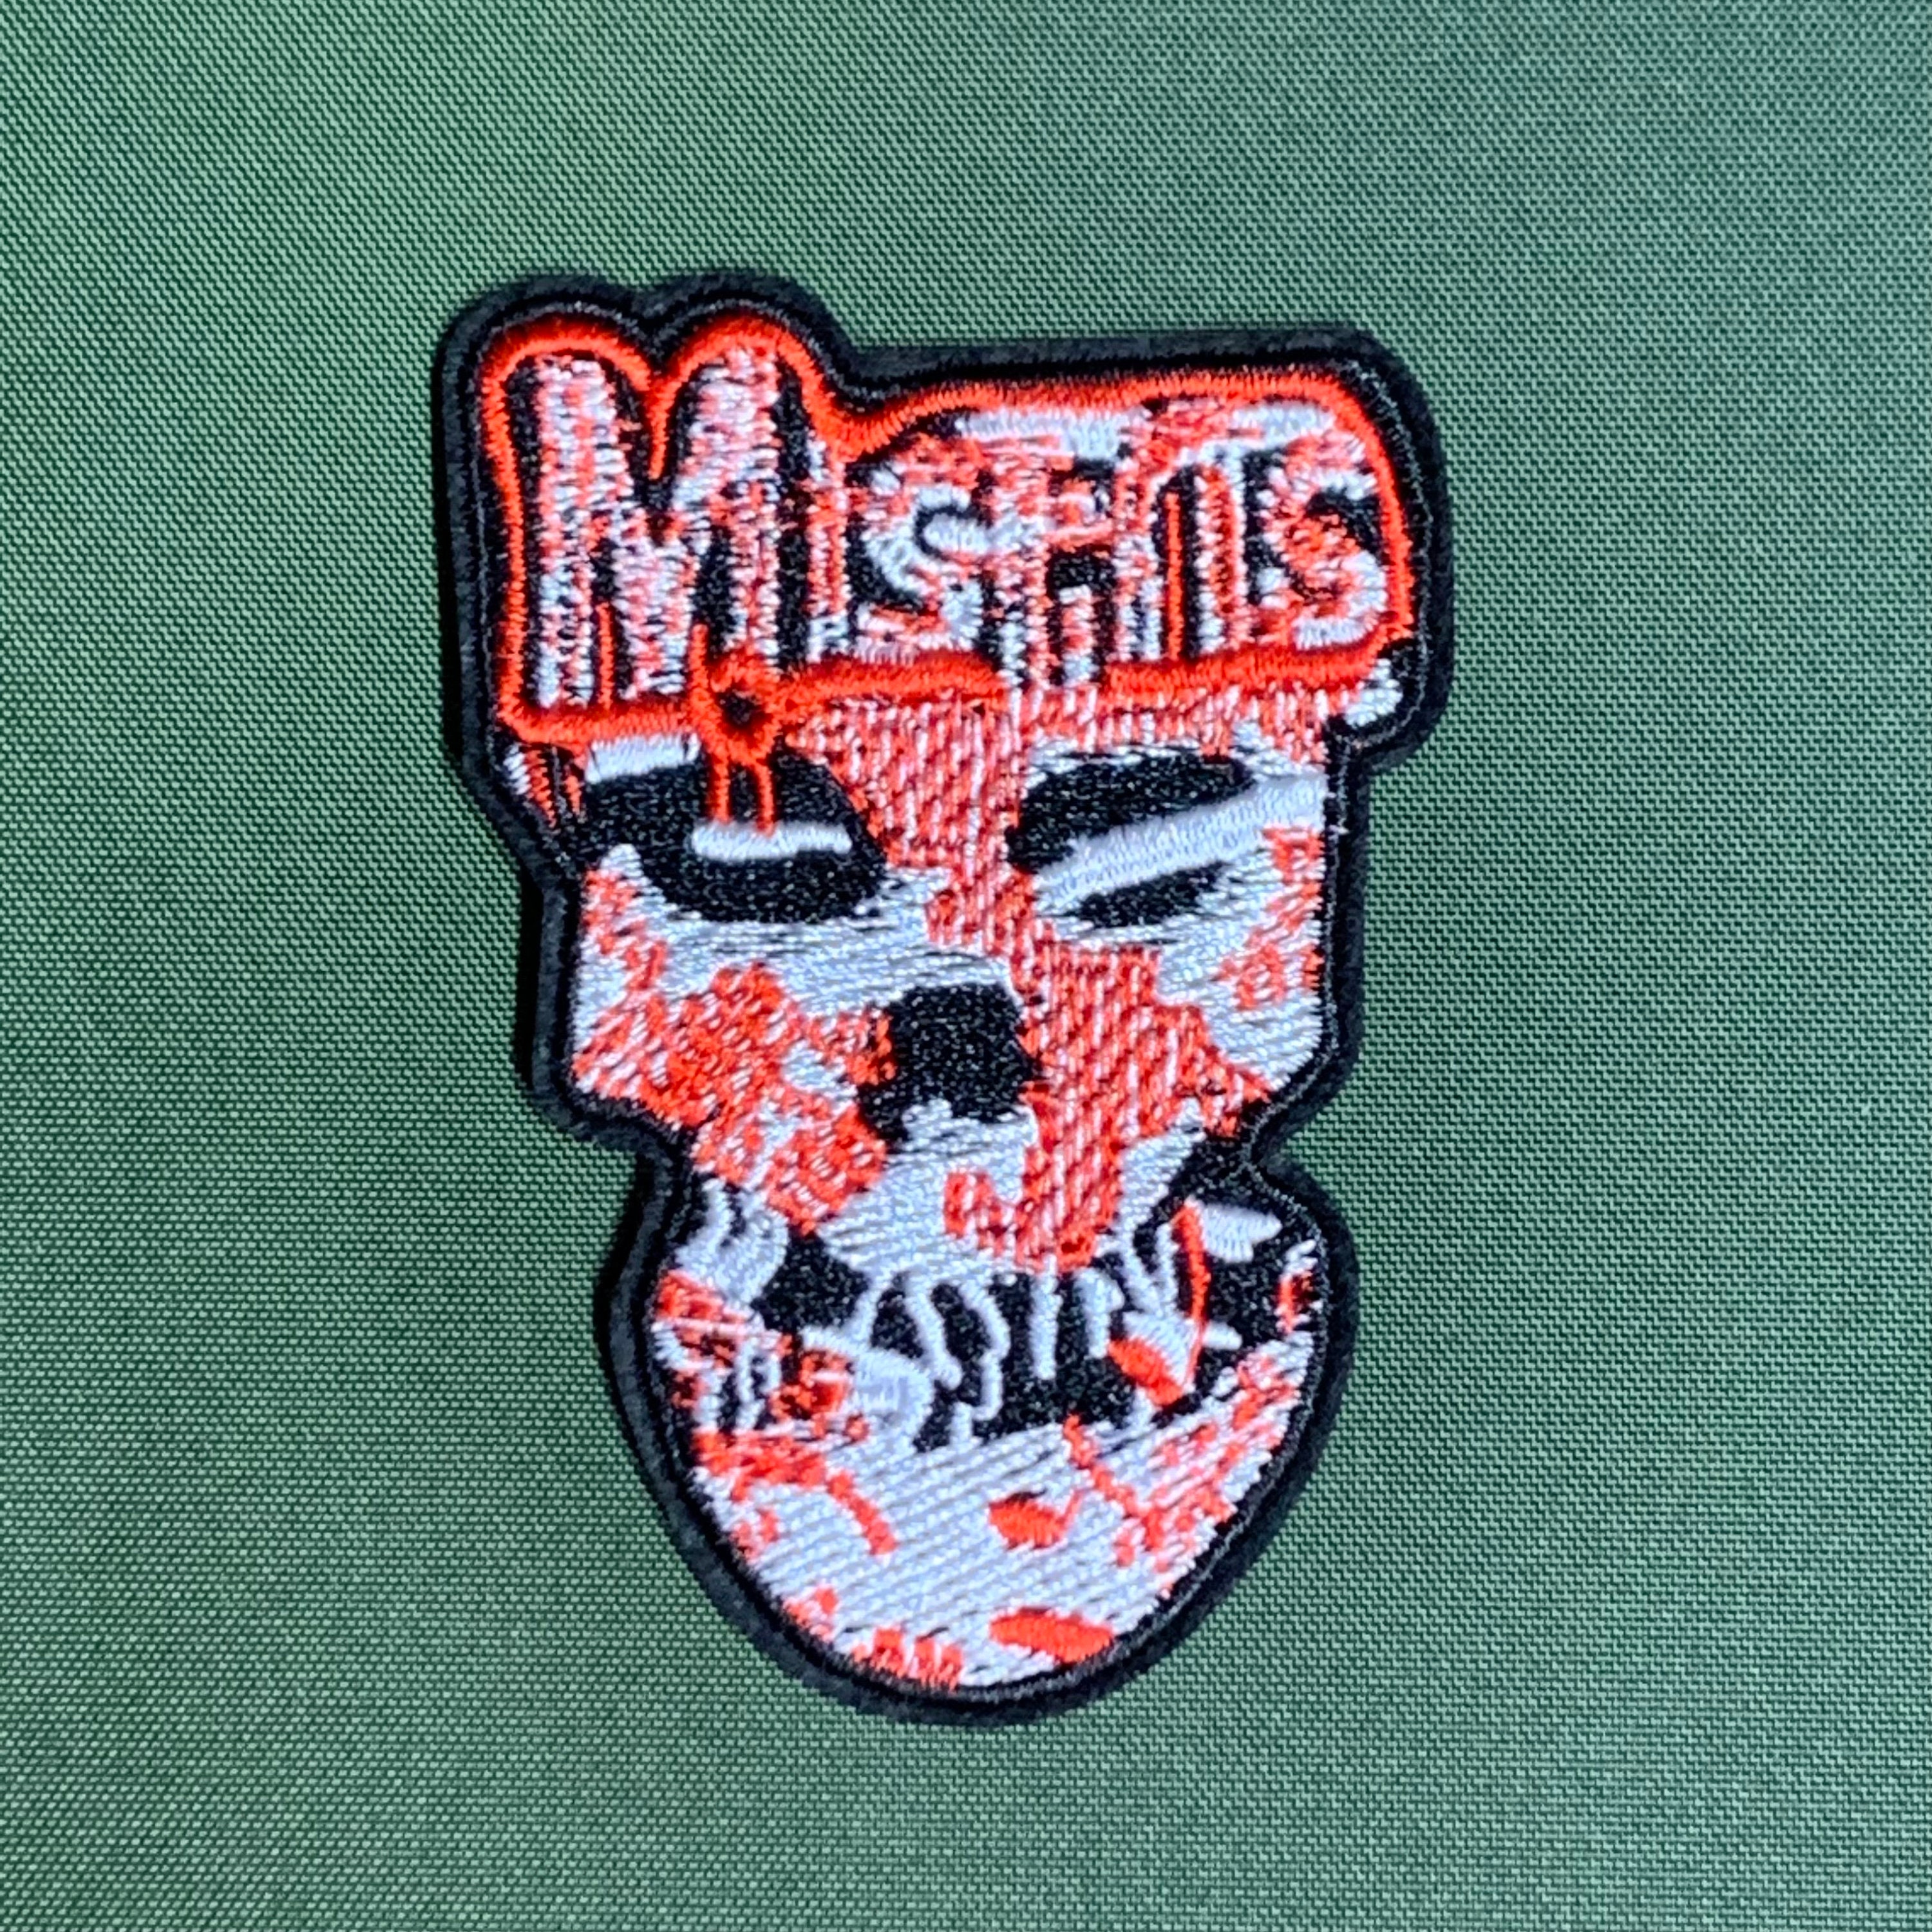 Official Misfits Patch Small Logo Skull Embroidered Iron On